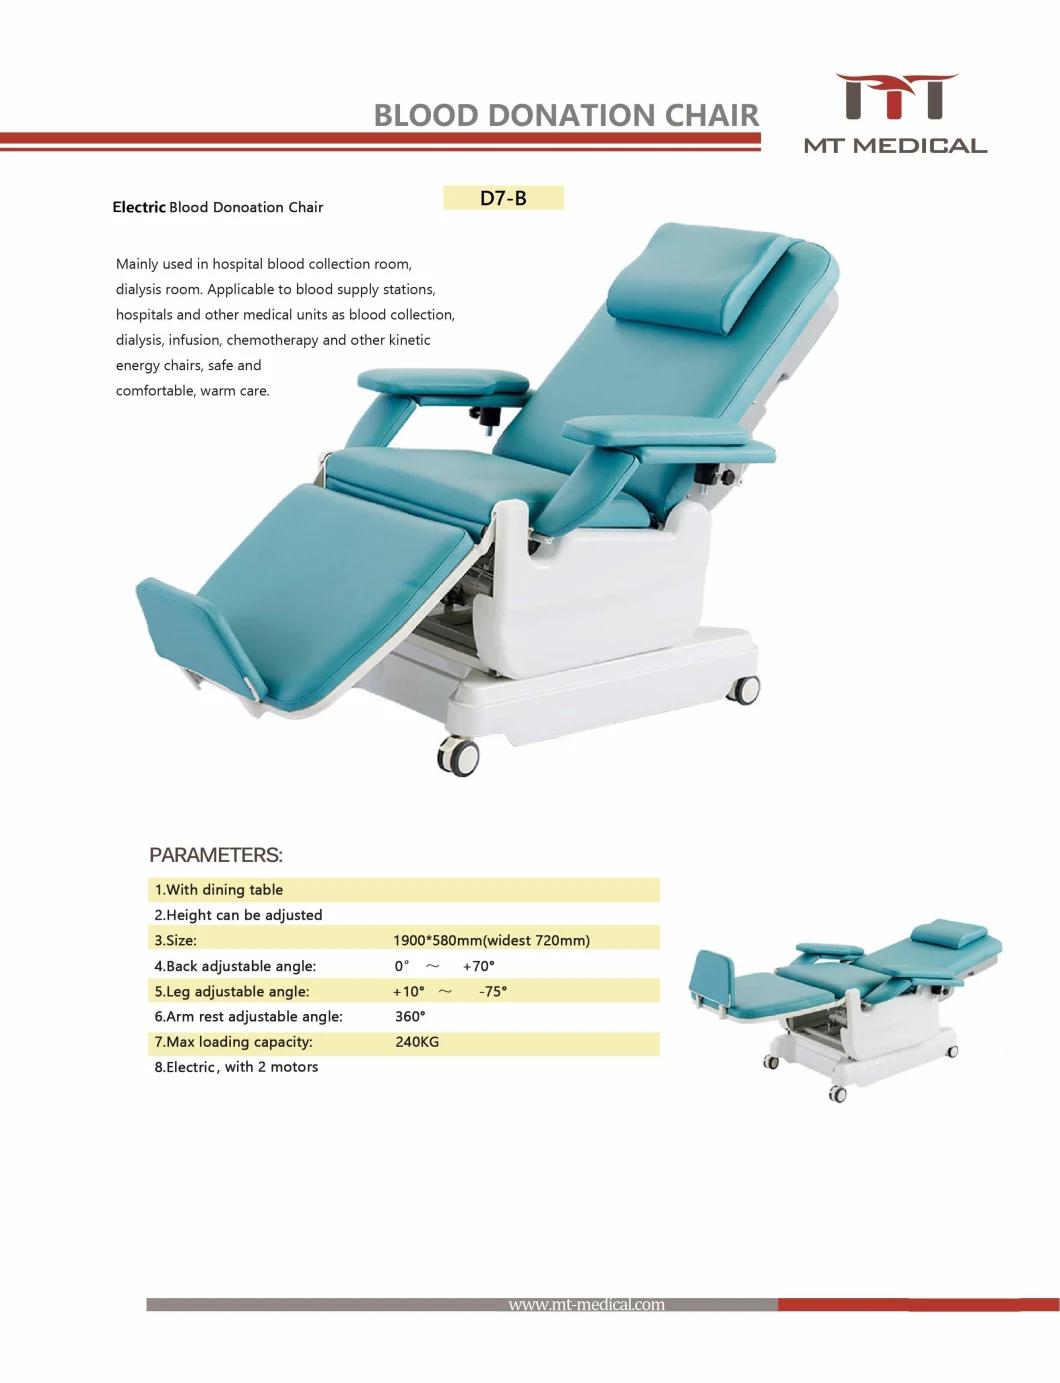 Mt Medical Luxury Electric Blood Donation Chair Hospital Dialysis Room Used Chair Electric and Manual Infusion Chair